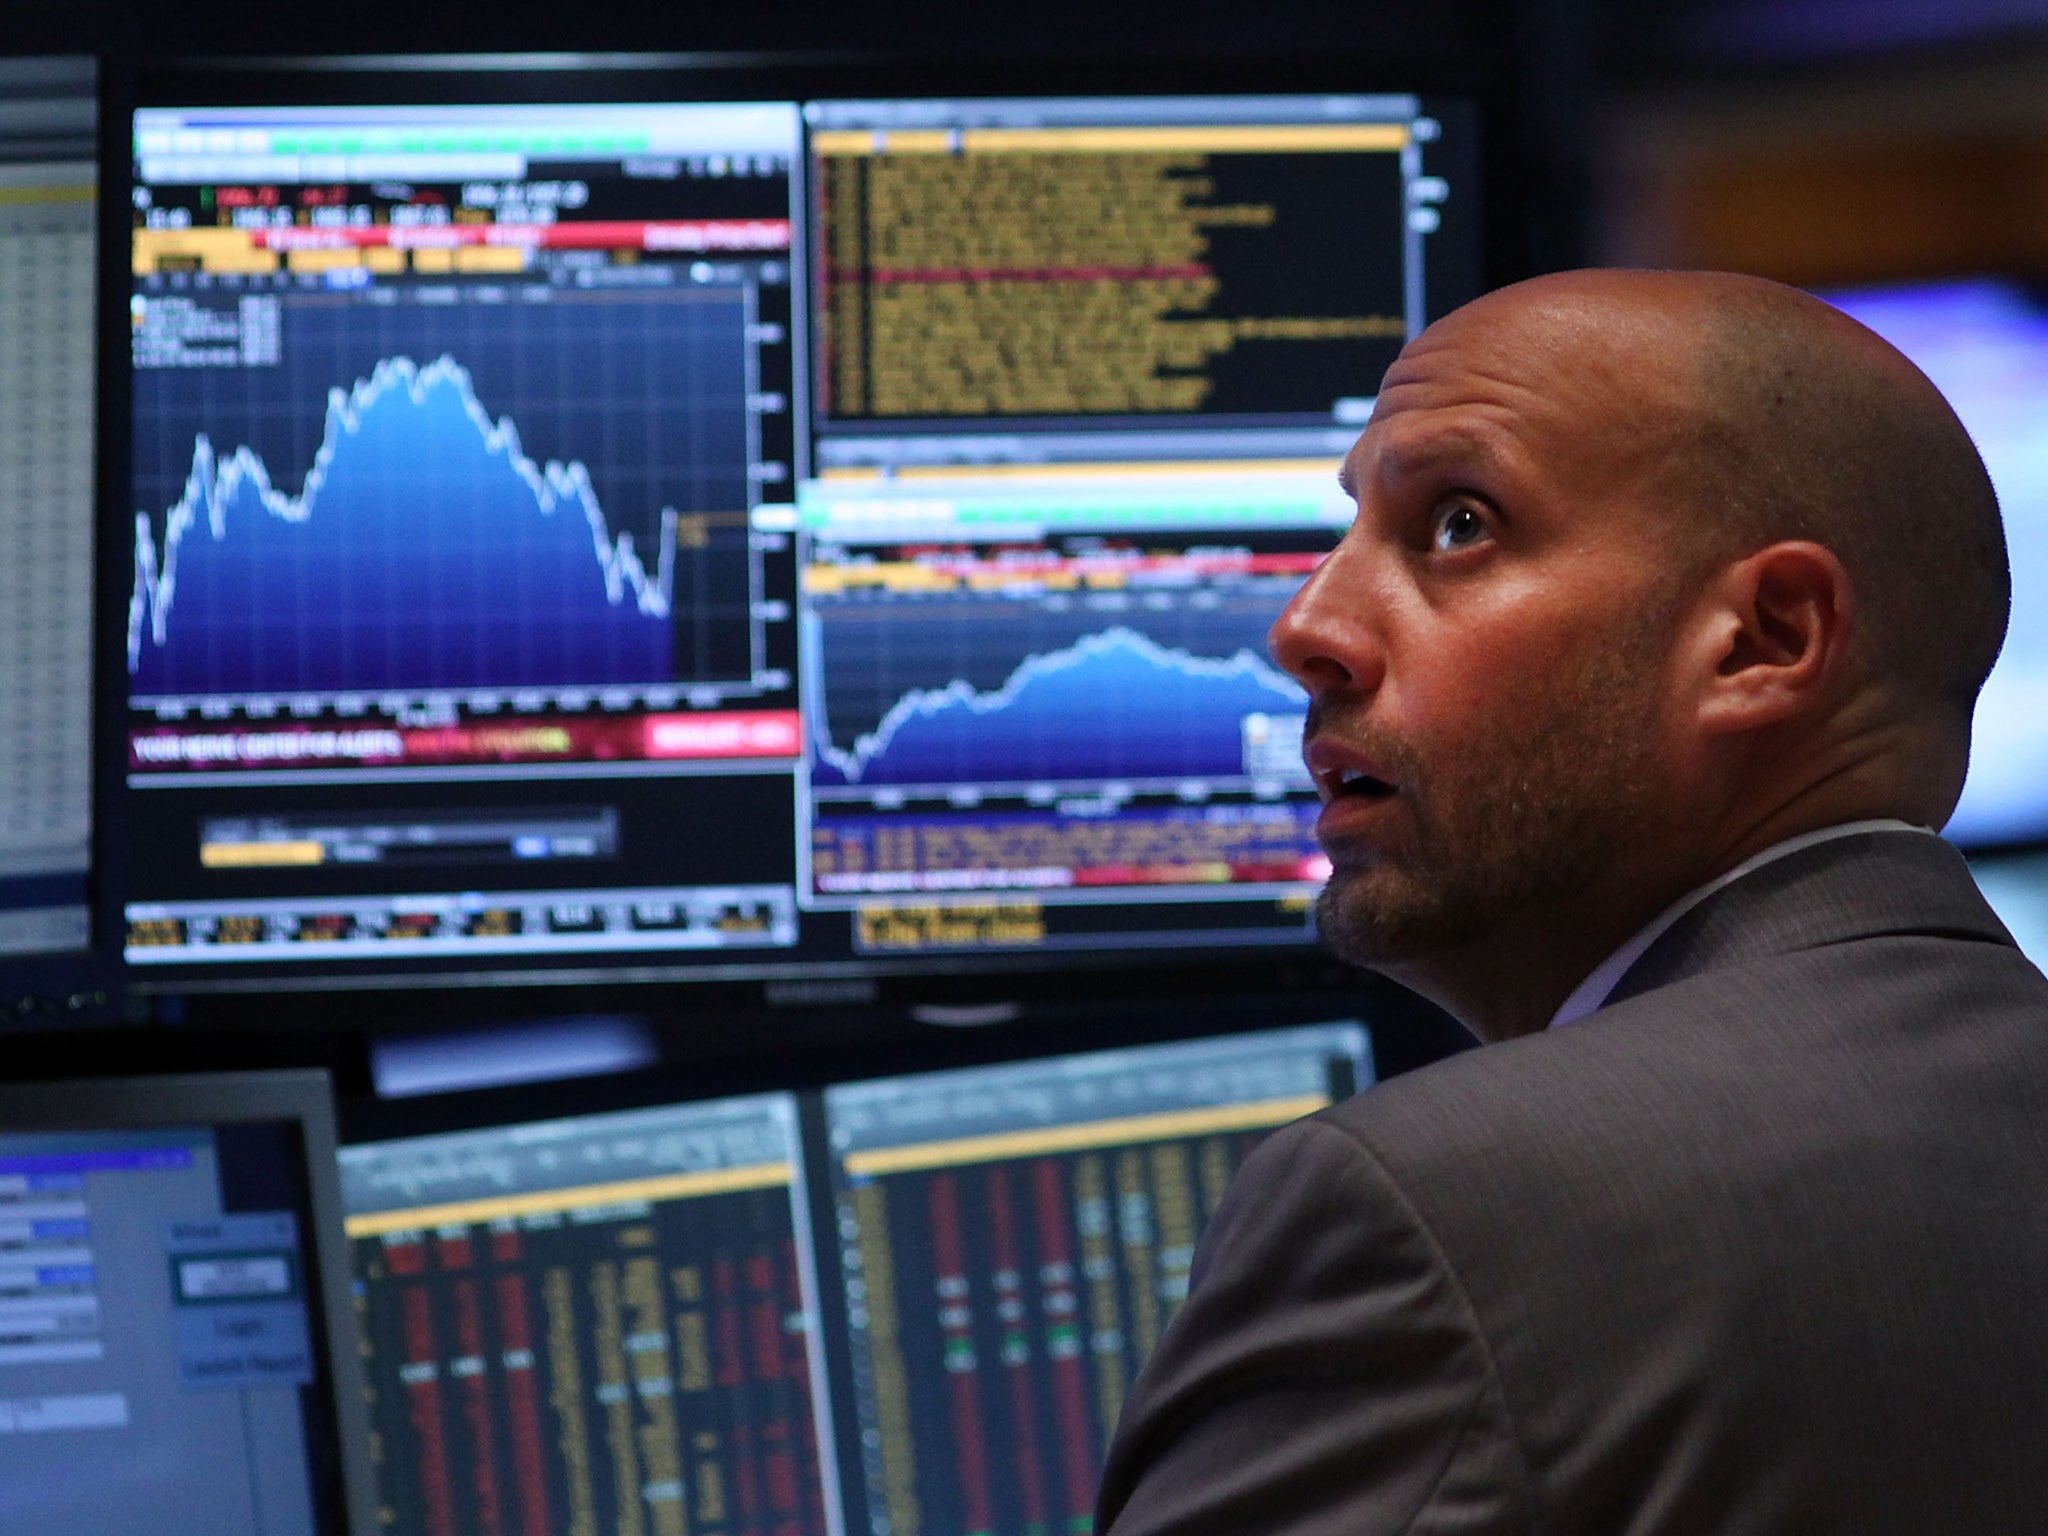 A trader works on the floor of the New York Stock Exchange (NYSE) on August 24, 2015 in New York City